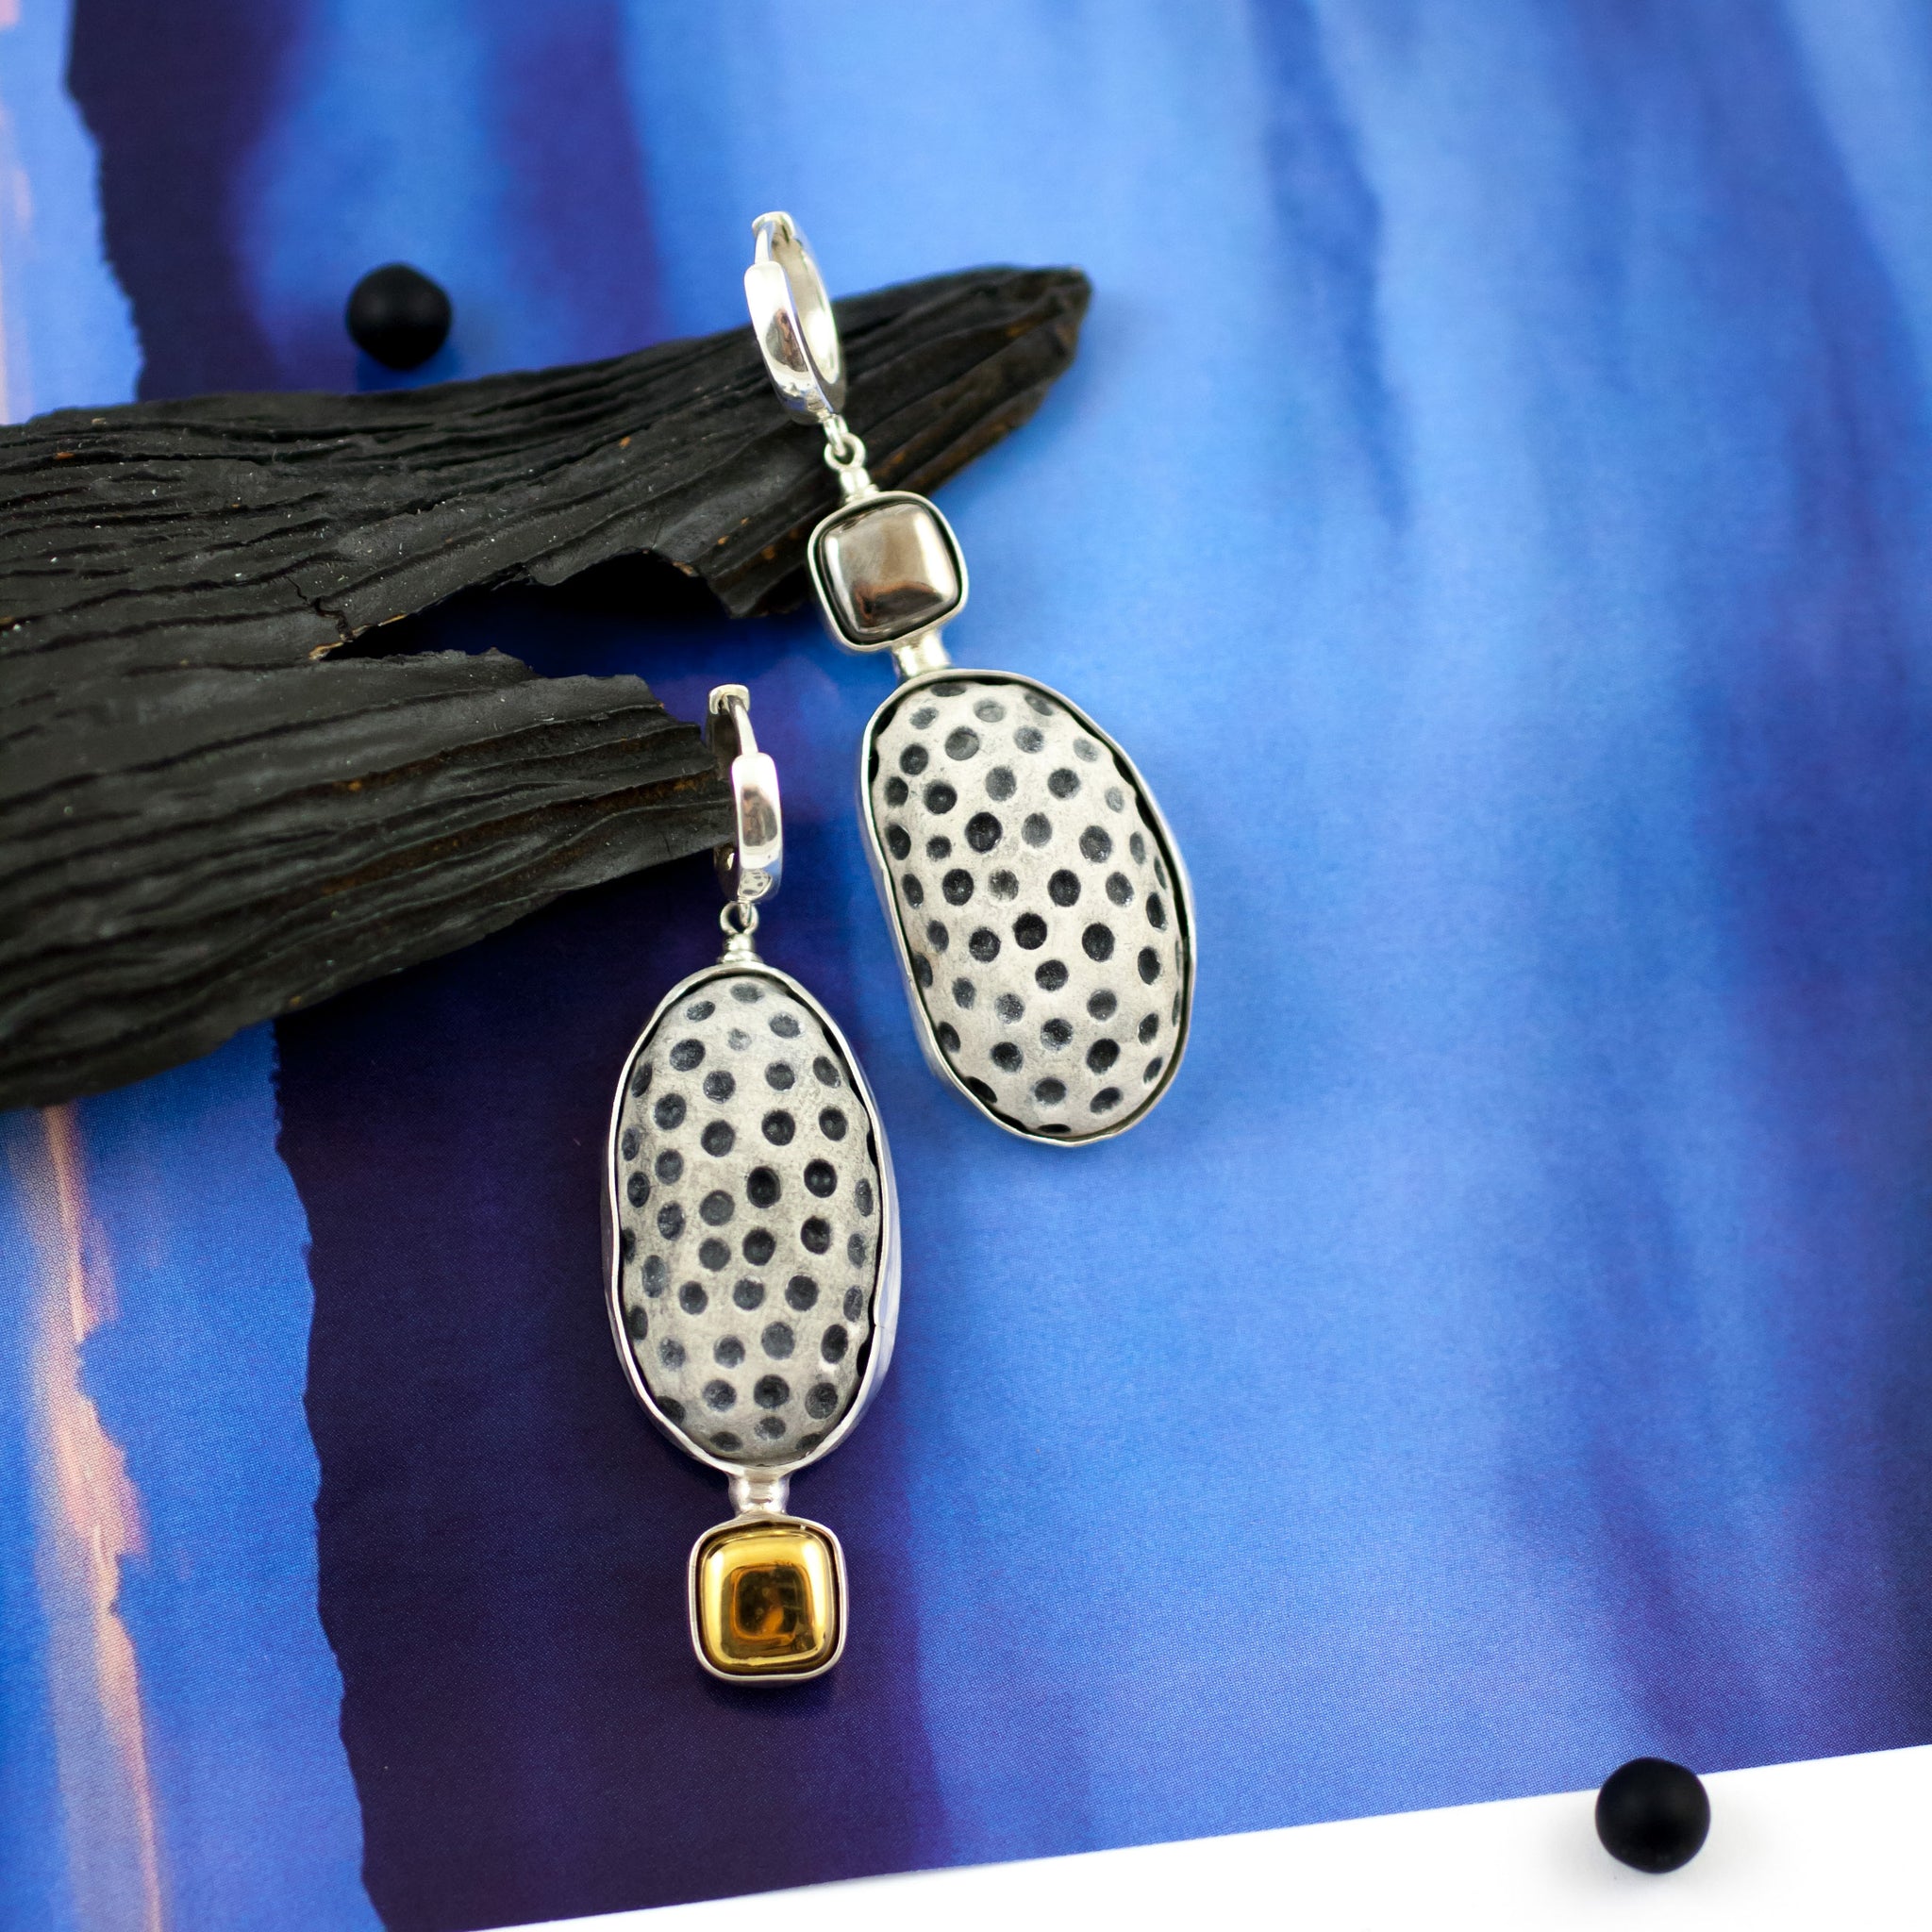 Gold and platinum plated asymmetrical earrings with black dots